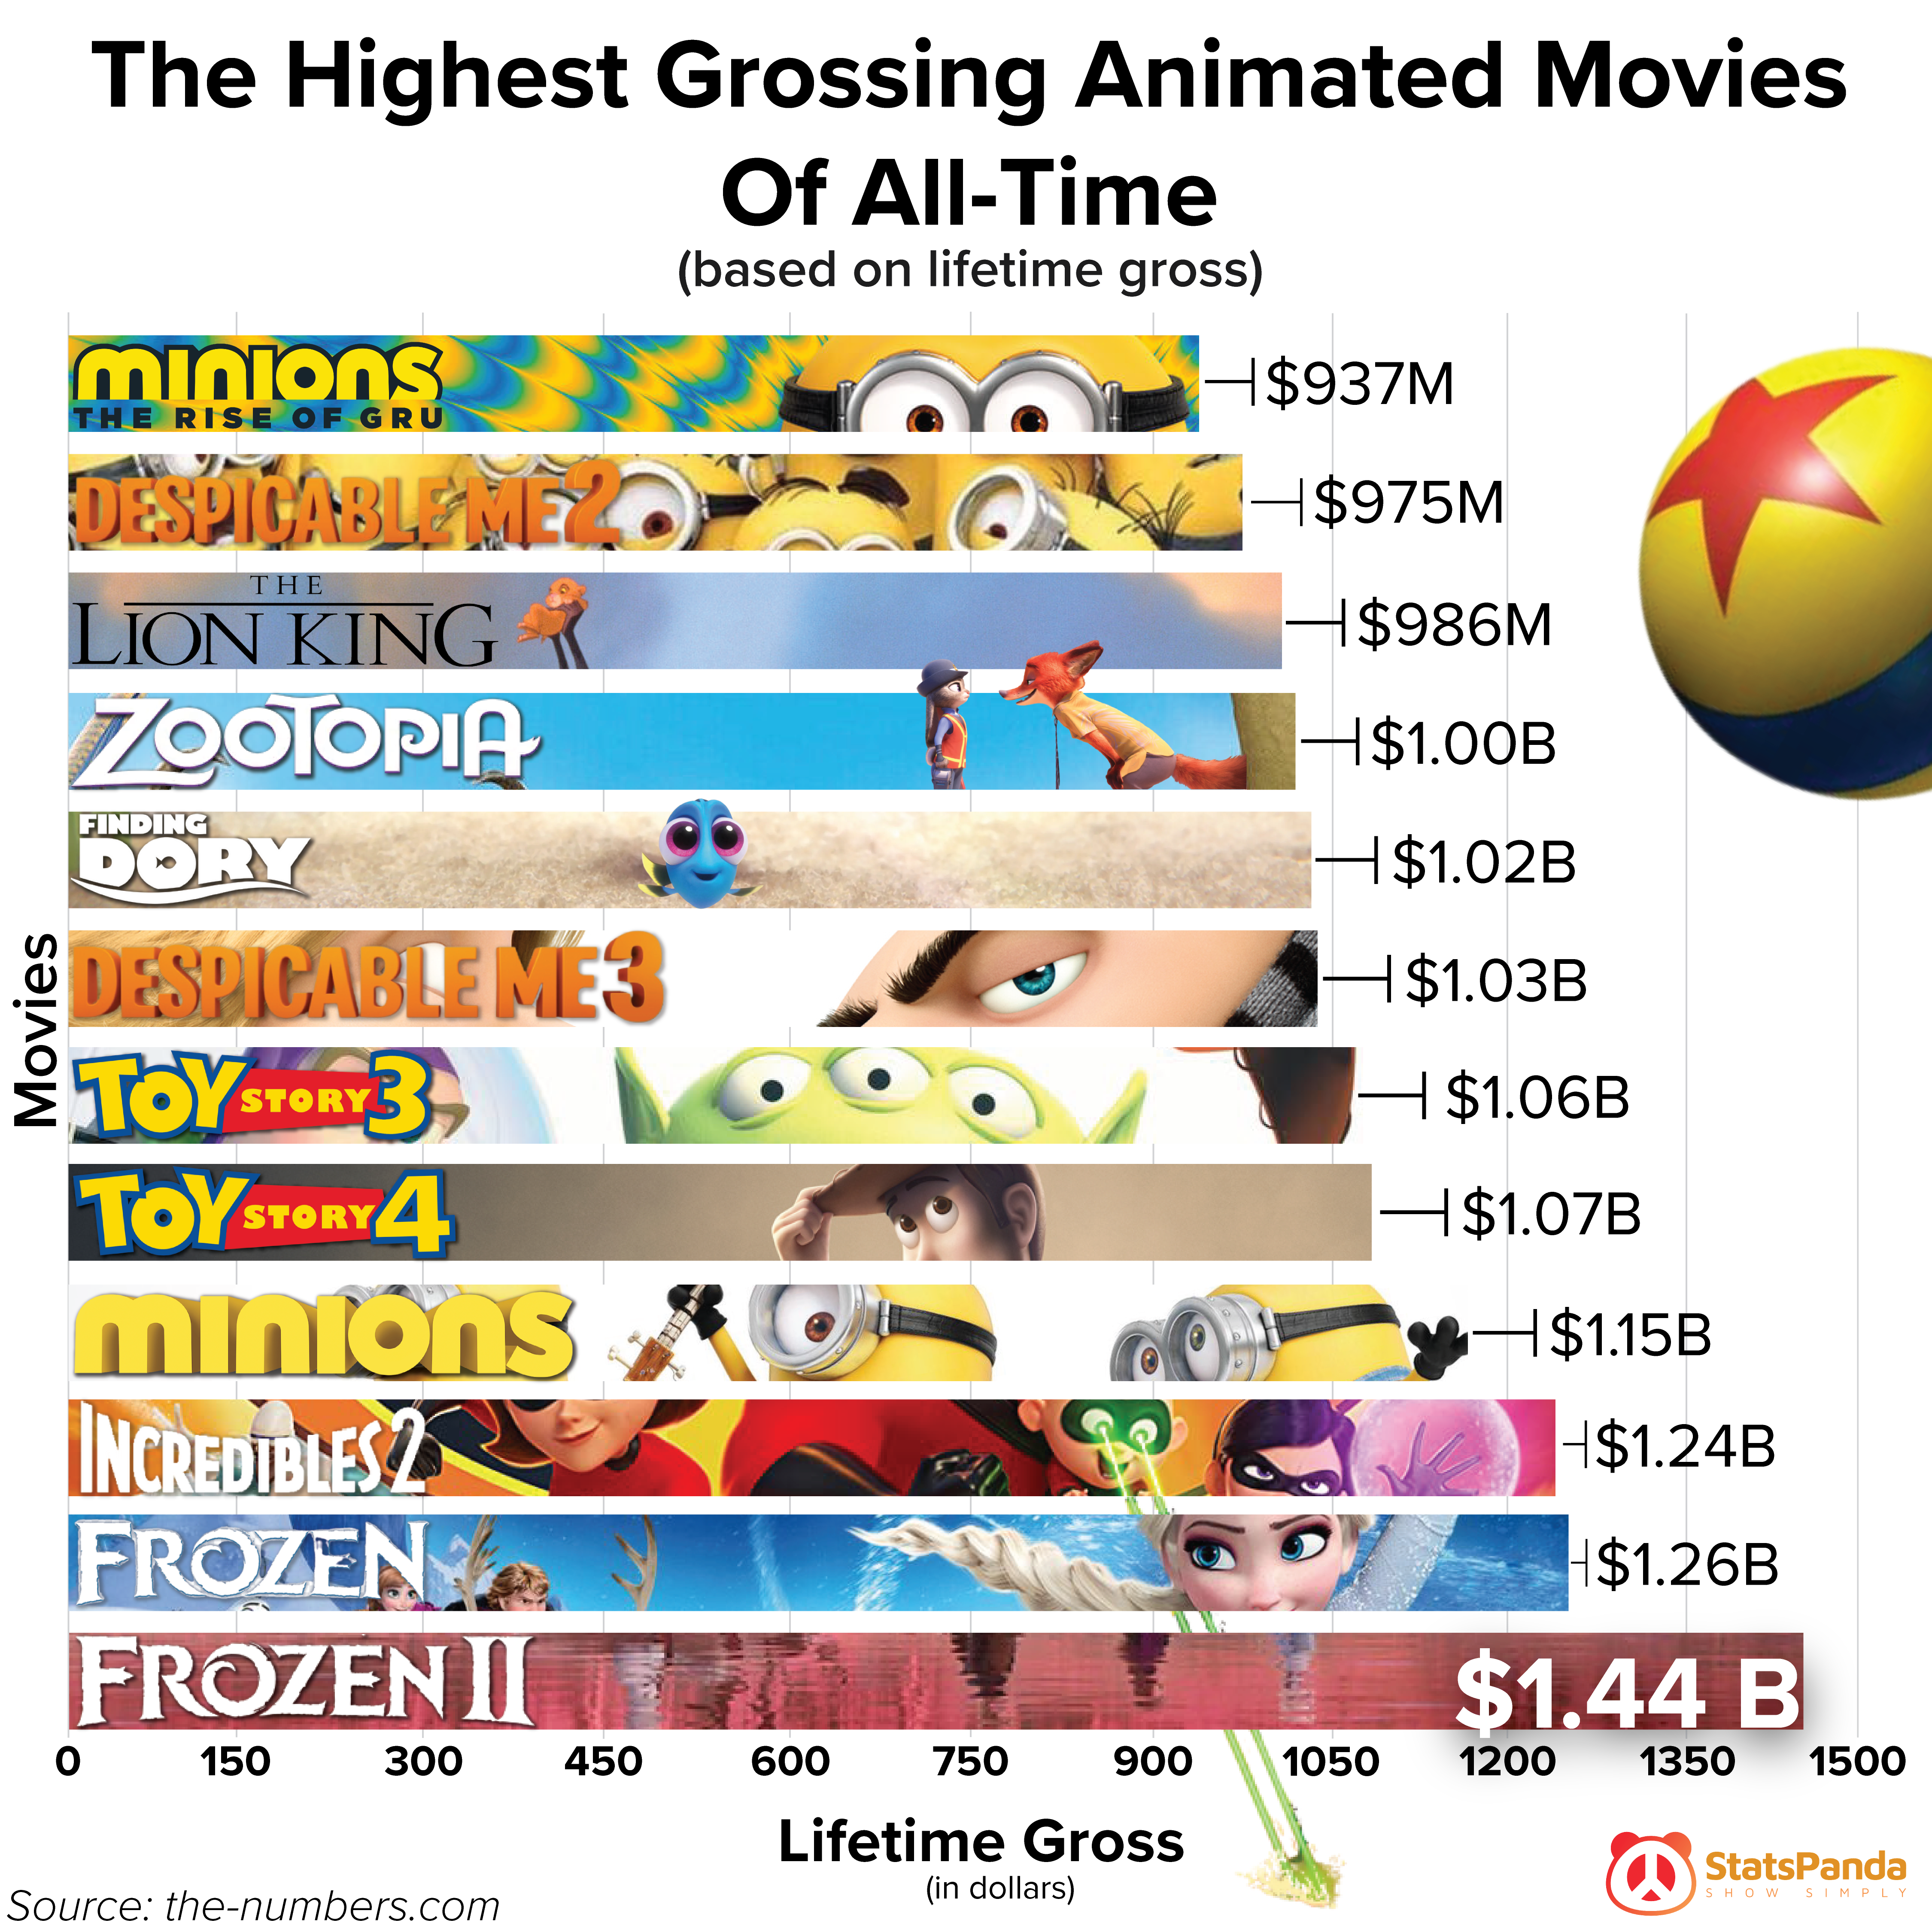 REVEALED: The 12 Highest-Grossing Animated Movies Of All Time